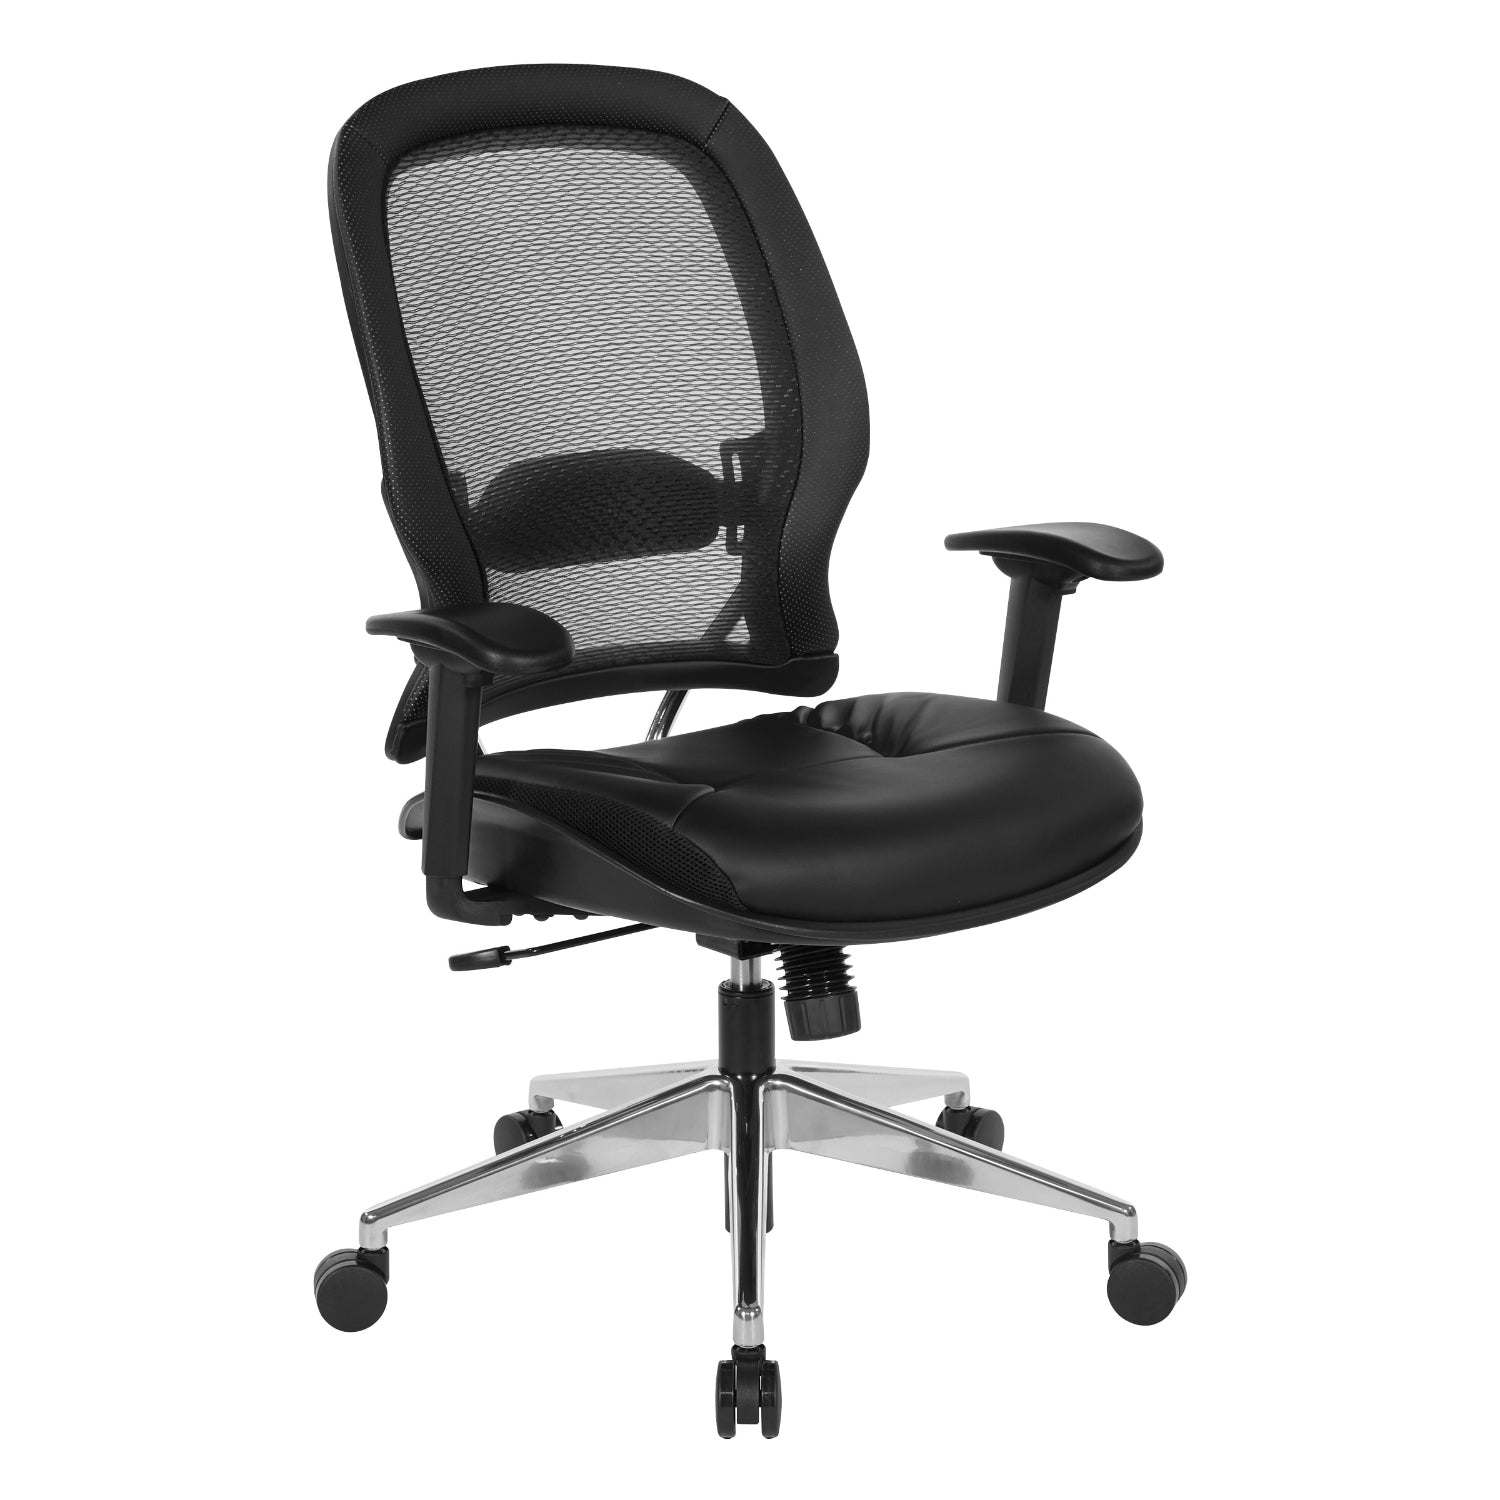 Air Grid® Back Chair with Black Bonded Leather Seat and Trim, Adjustable Arms, Adjustable Lumbar, and Angled Polished Aluminum Base